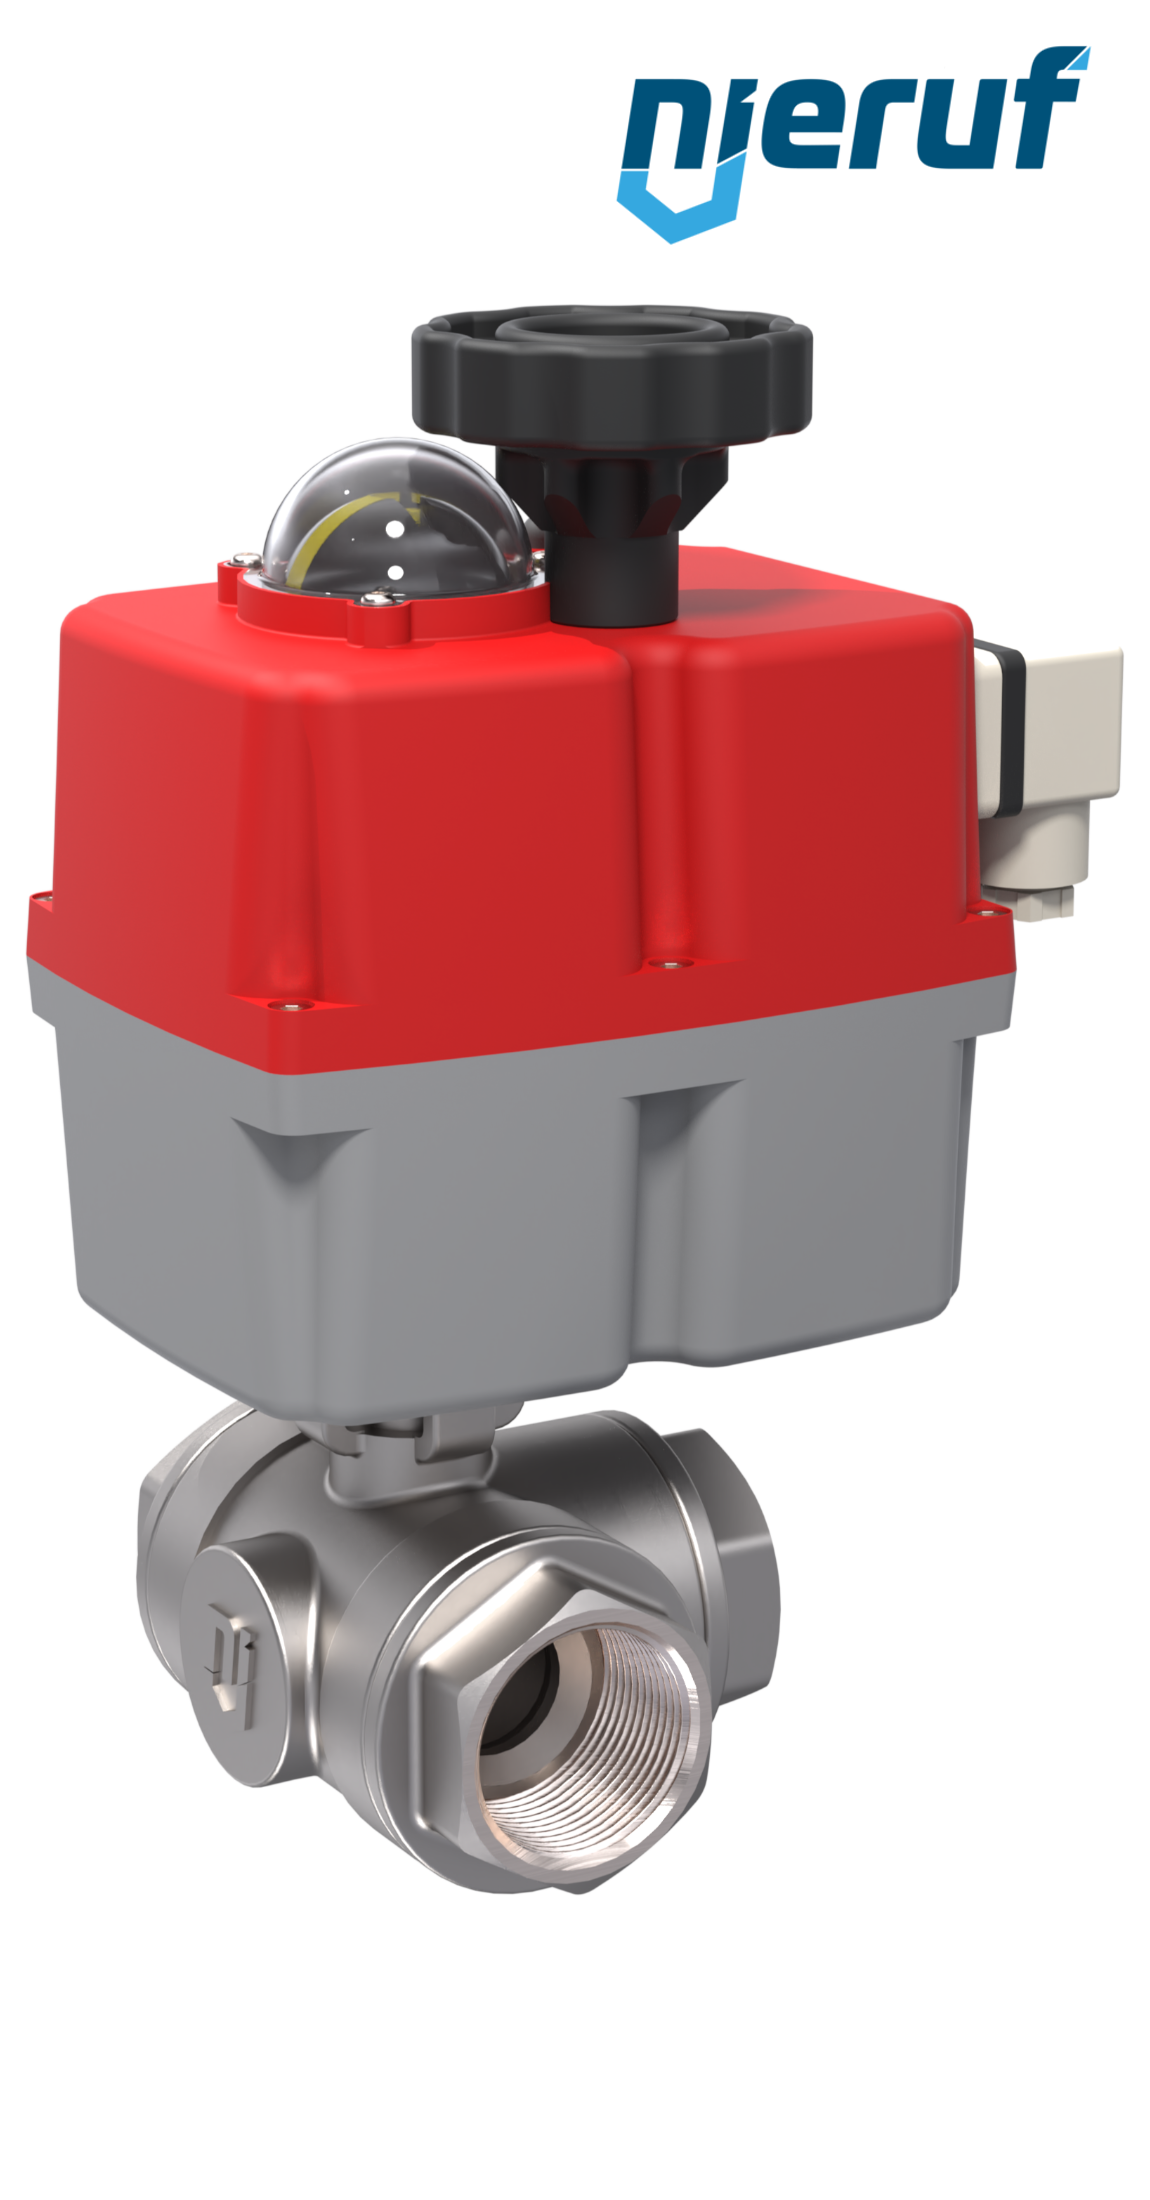 3 way automatic-ball valve 24-240V DN25 - 1" inch stainless steel reduced port design with T drilling